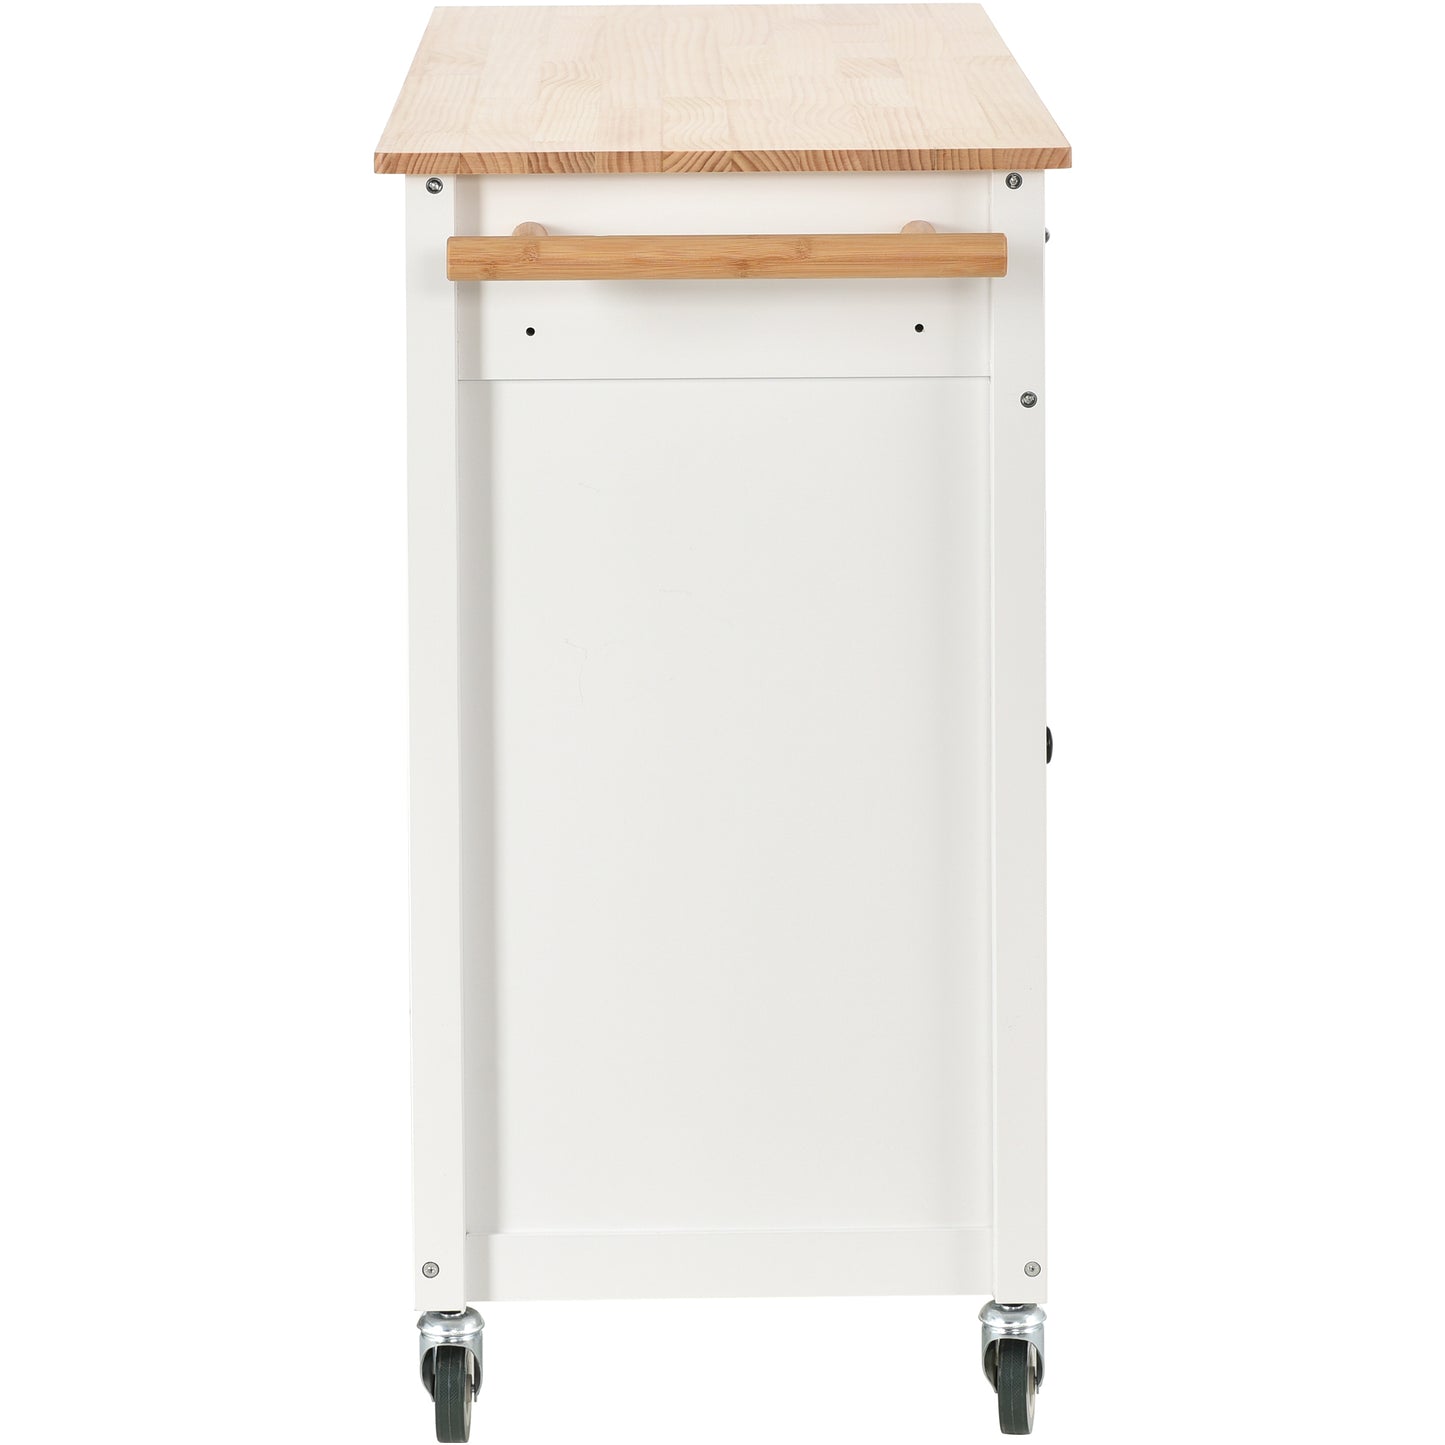 Kitchen Island Cart with Solid Wood Top and Locking Wheels,54.3 Inch Width,4 Door Cabinet and Two Drawers,Spice Rack, Towel Rack (White)